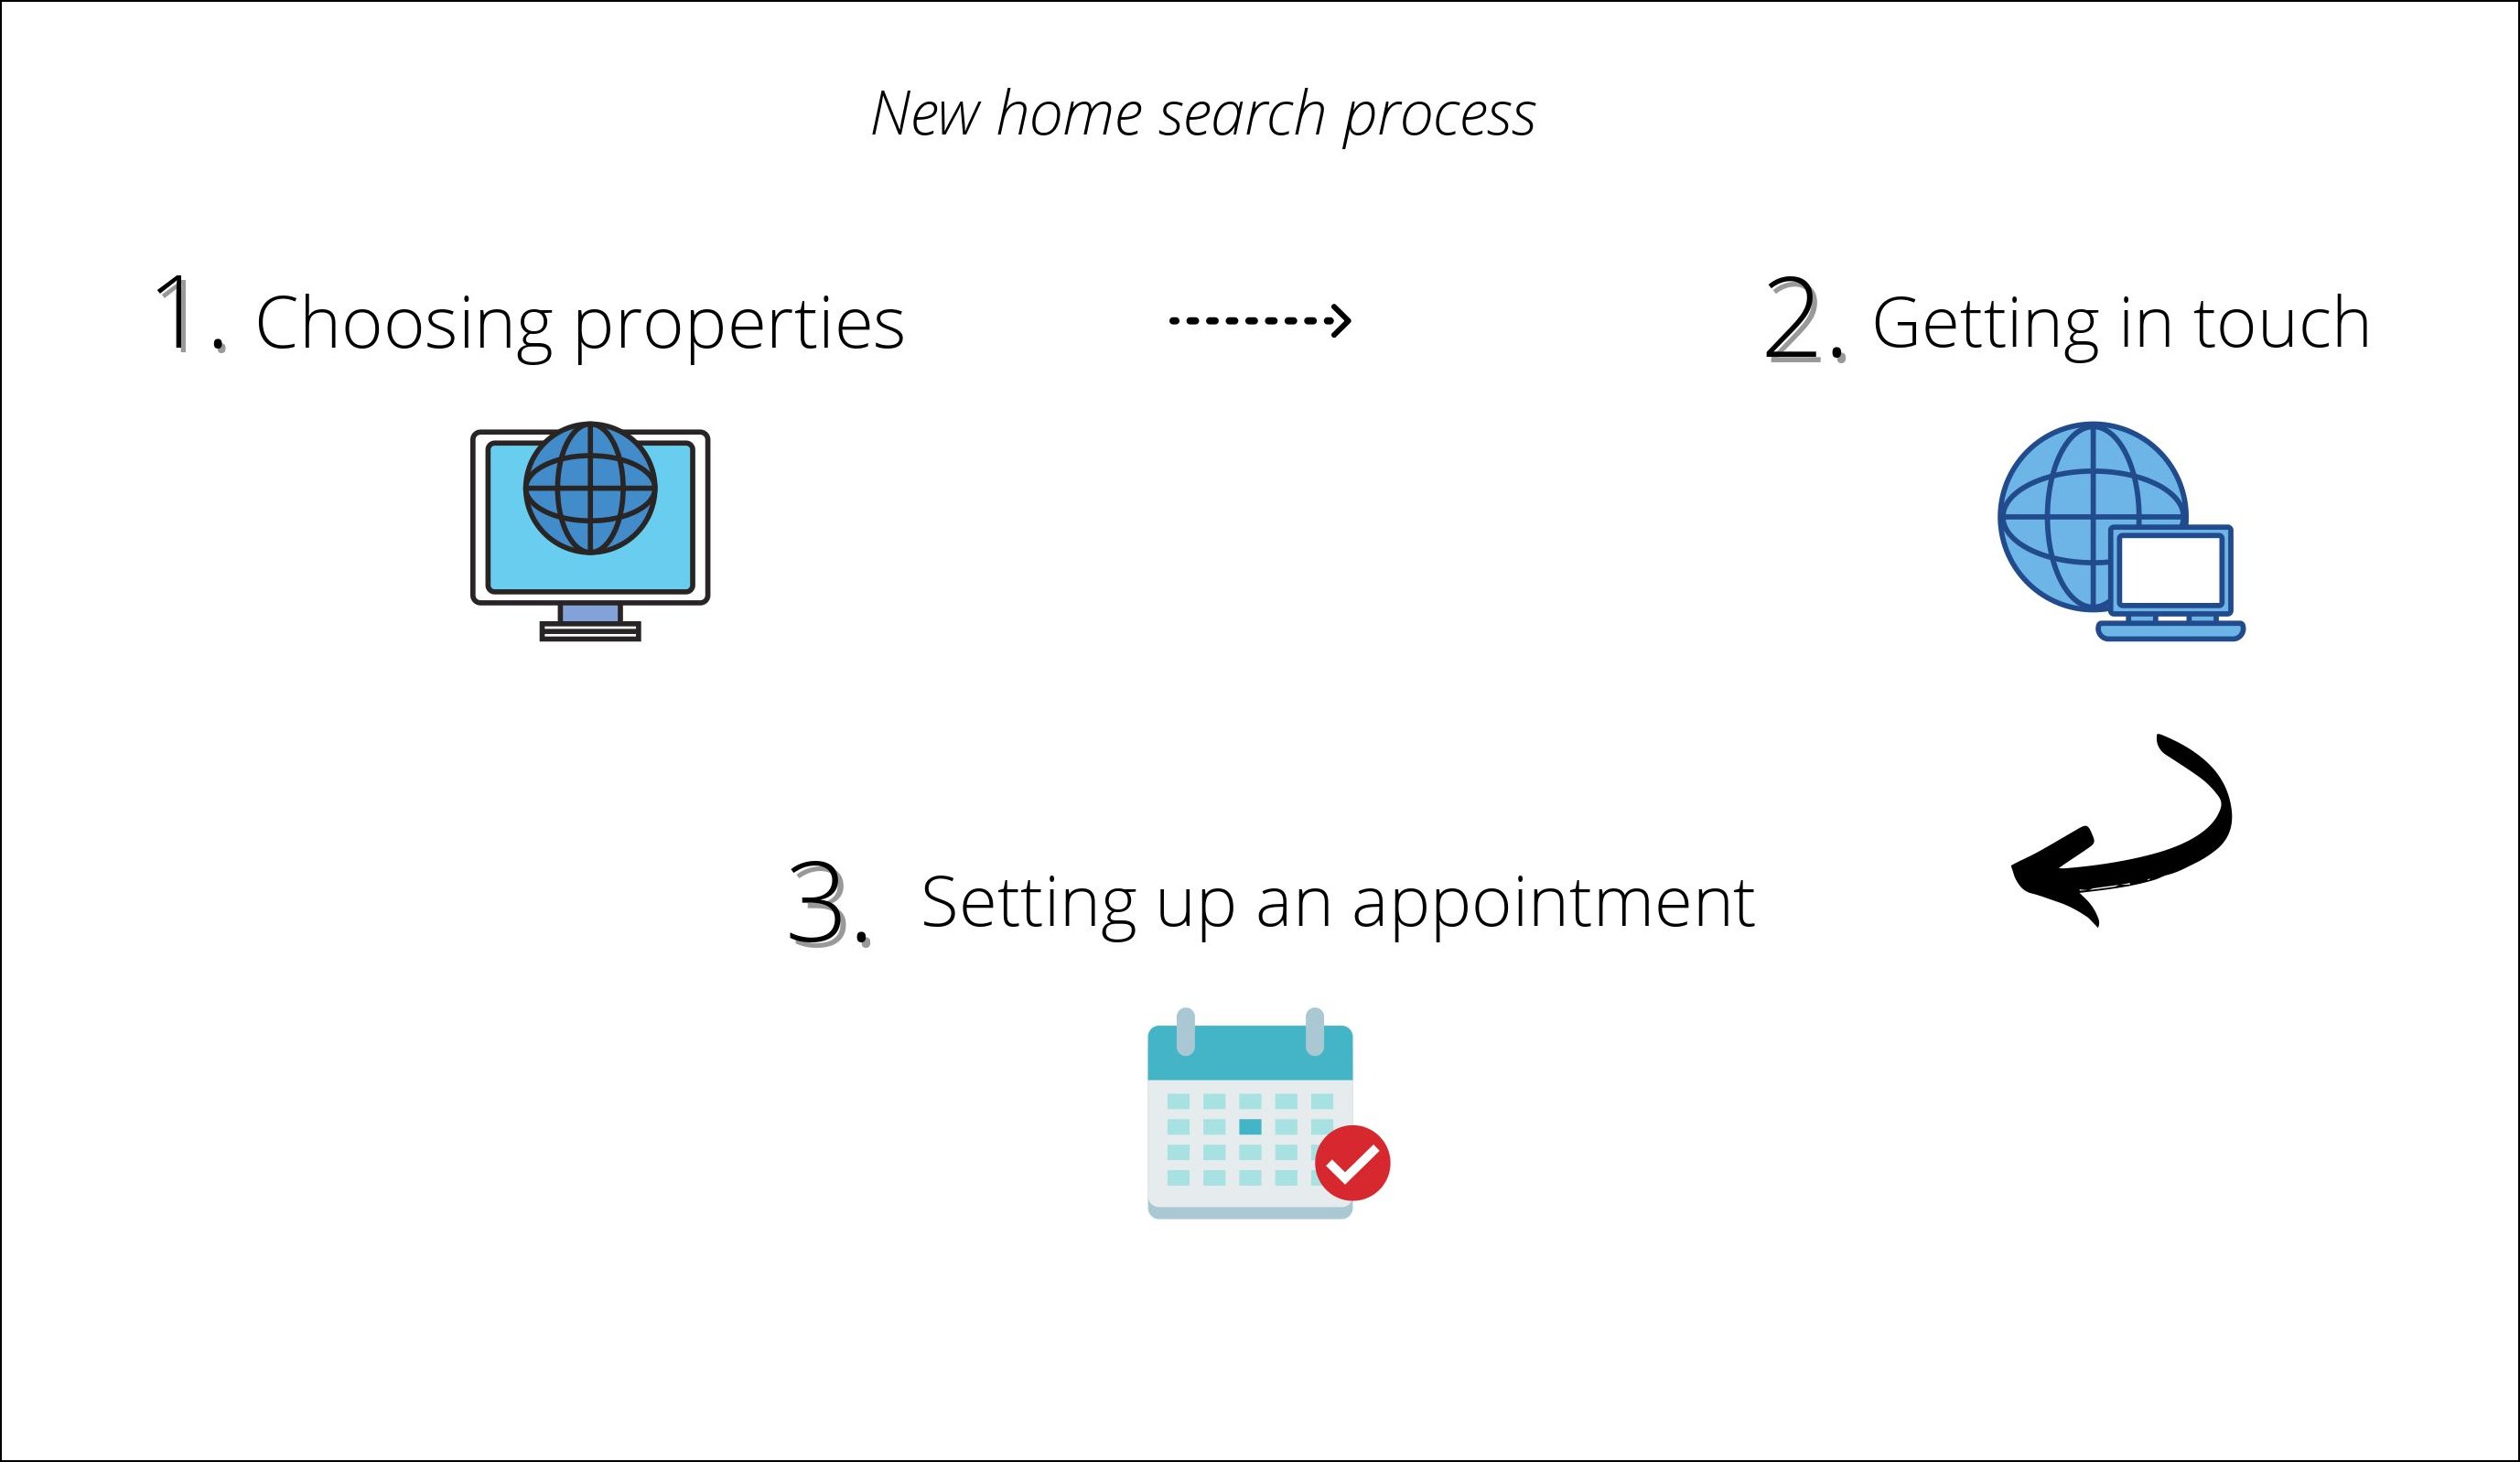 New homes search process